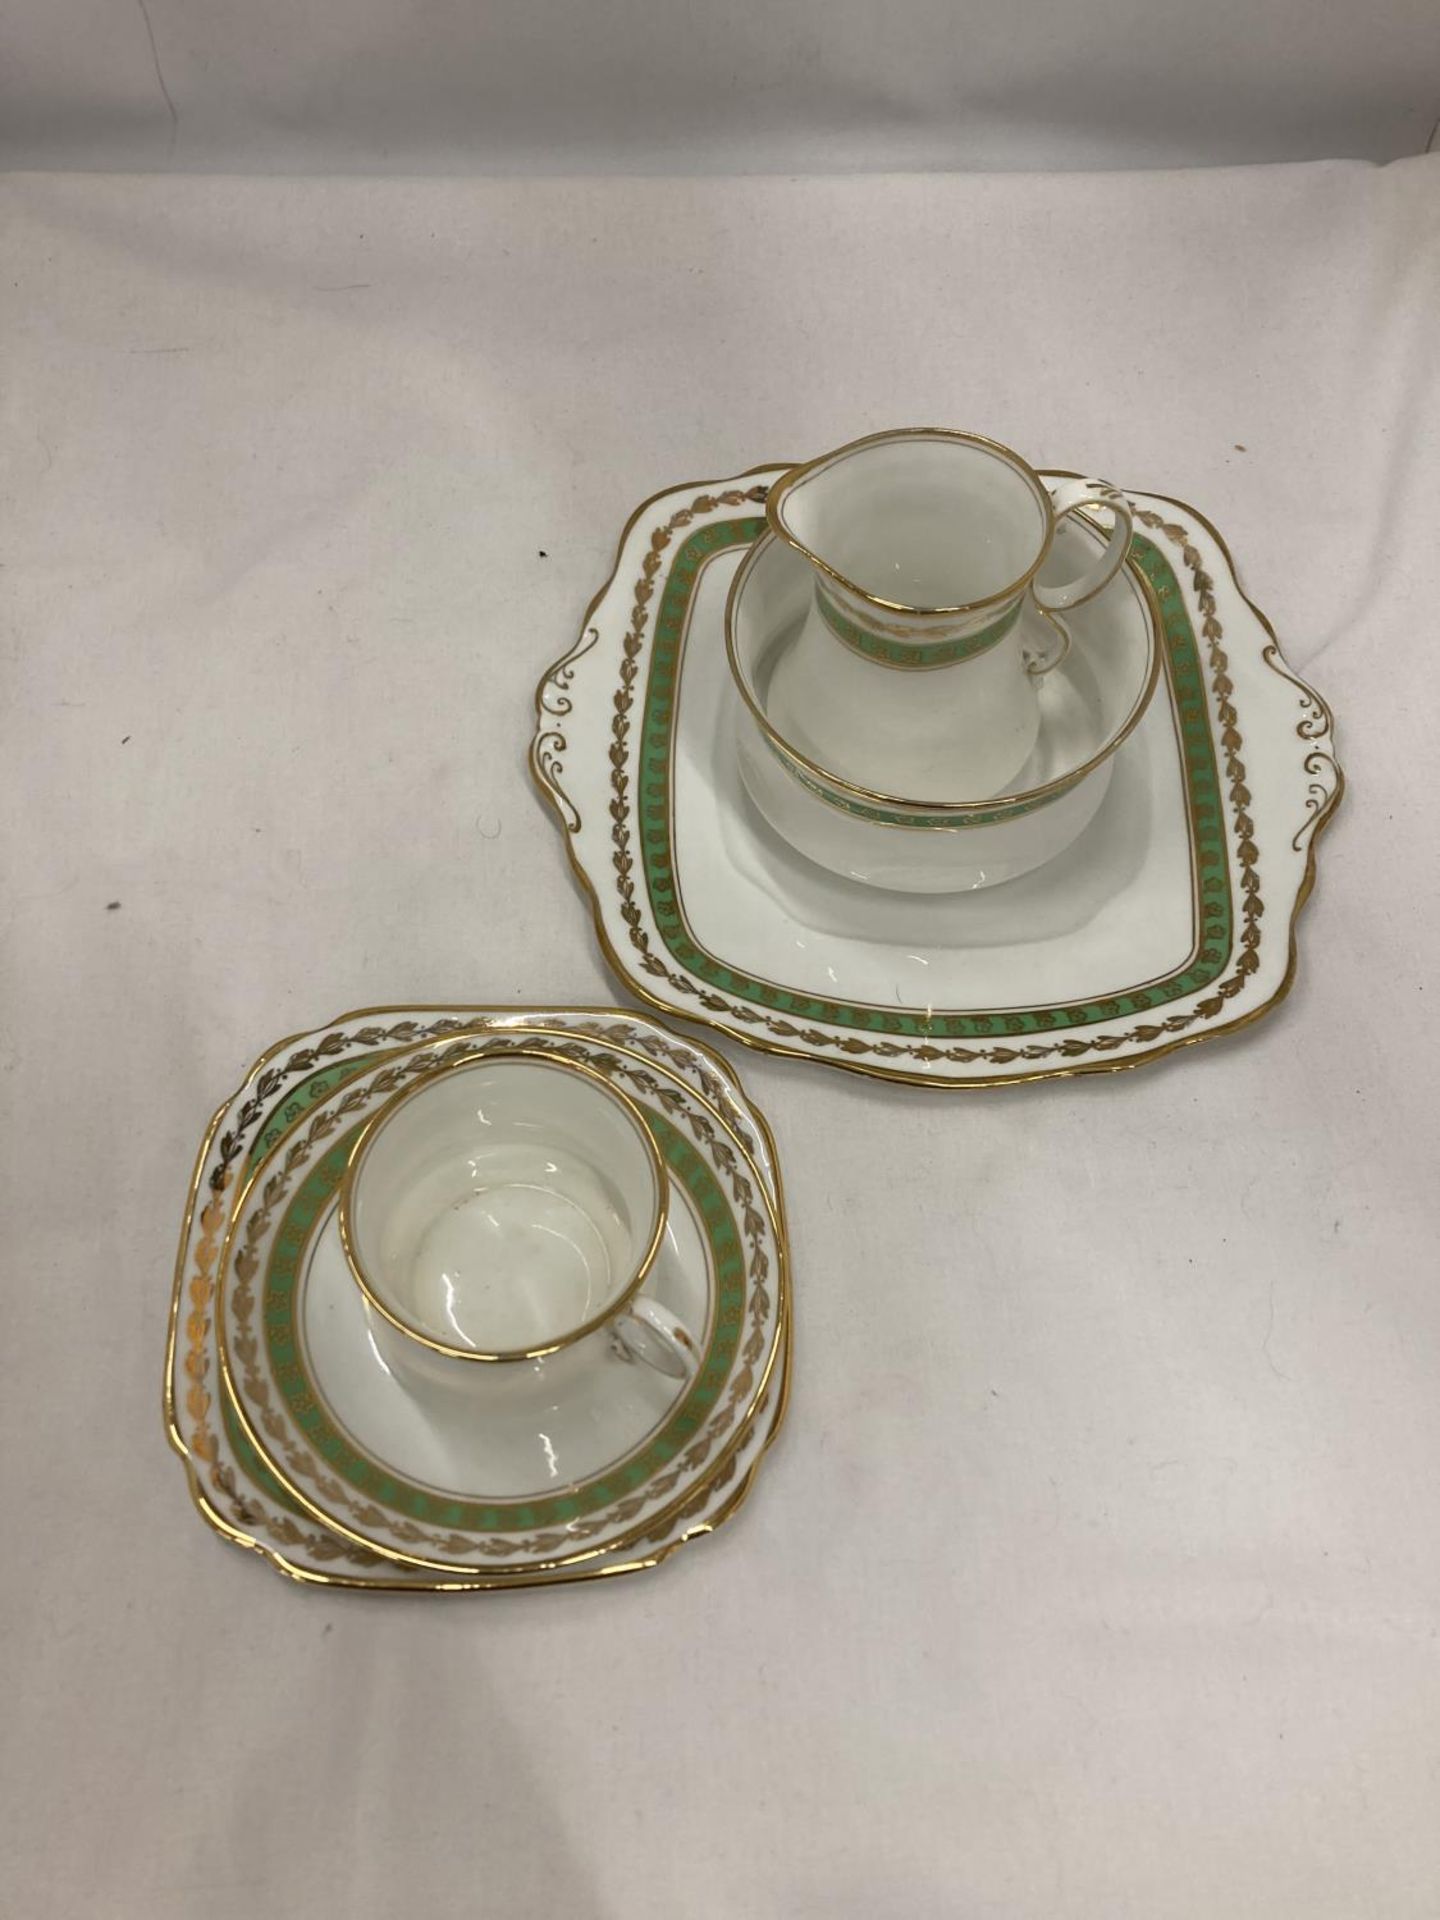 A VINTAGE ROYAL ALBERT PART CHINA TEASET TO INCLUDE CAKE PLATES, A SUGAR BOWL, CREAM JUGS, CUPS, - Image 4 of 4